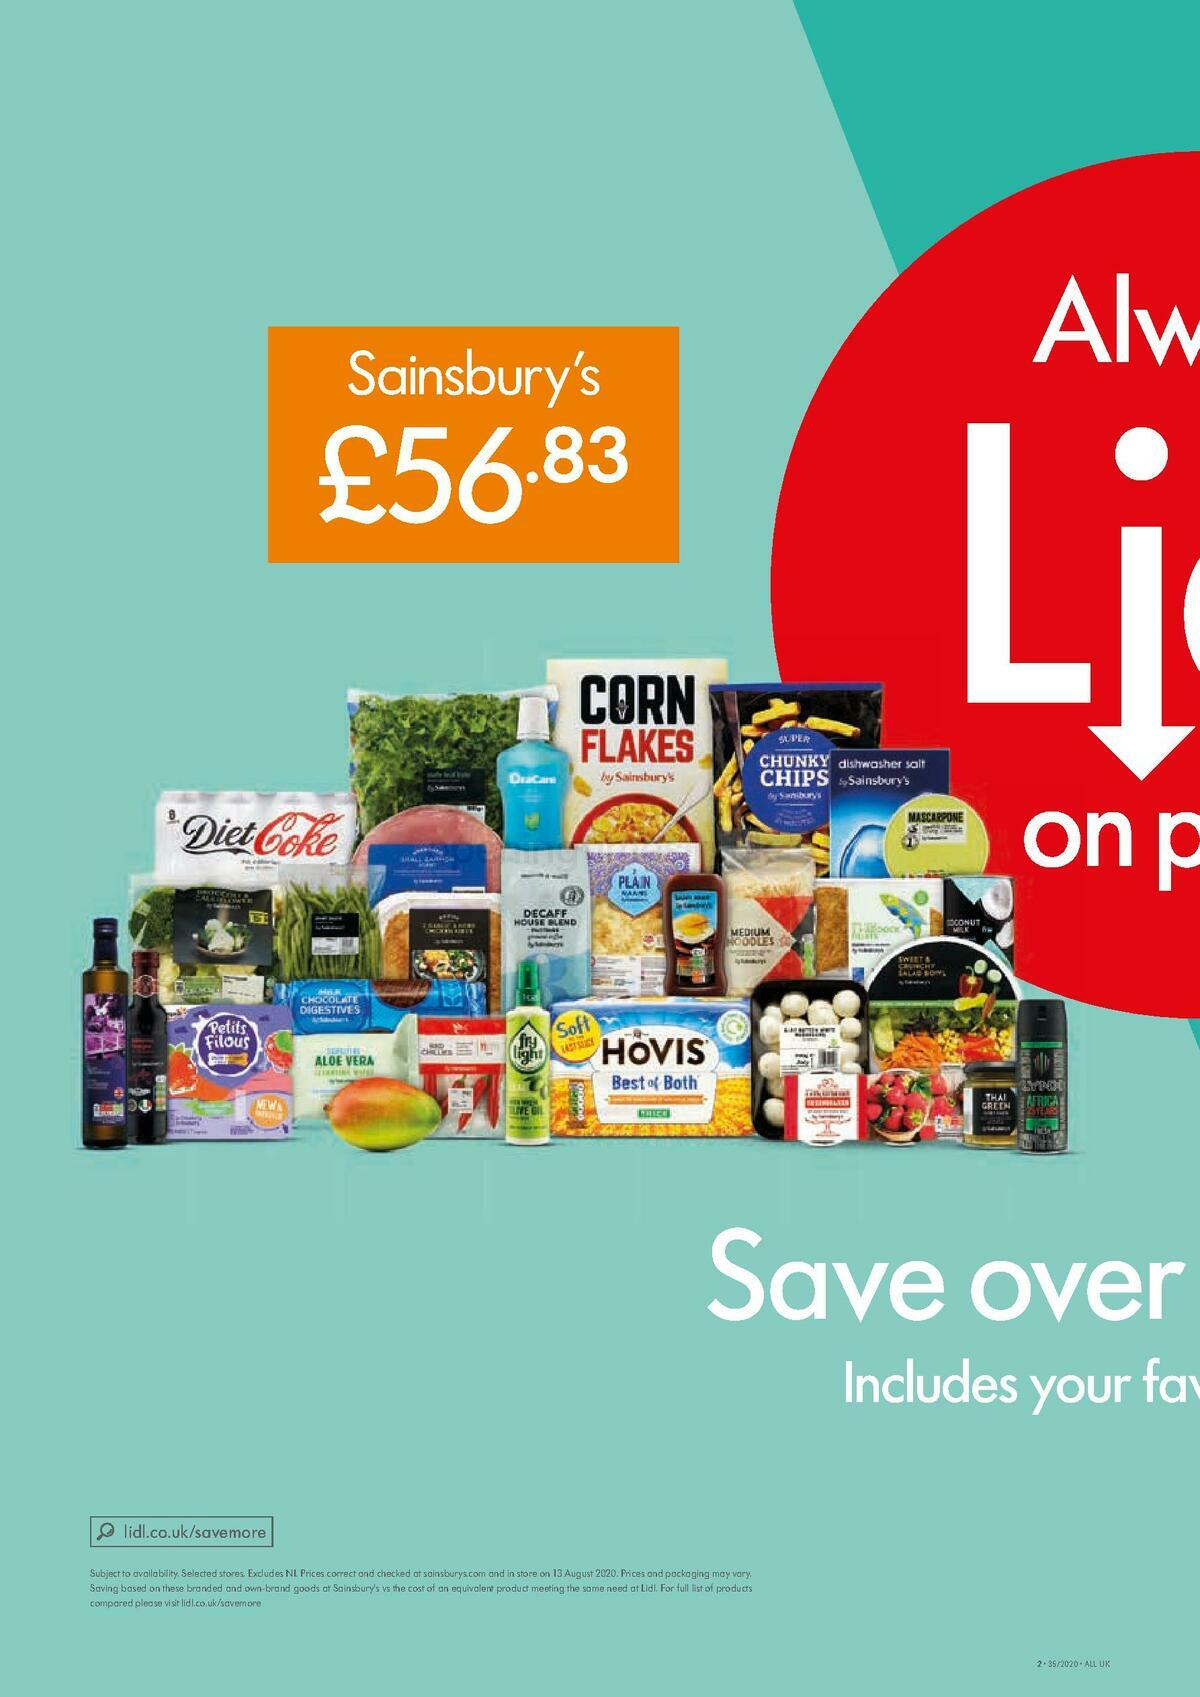 LIDL Offers from 27 August